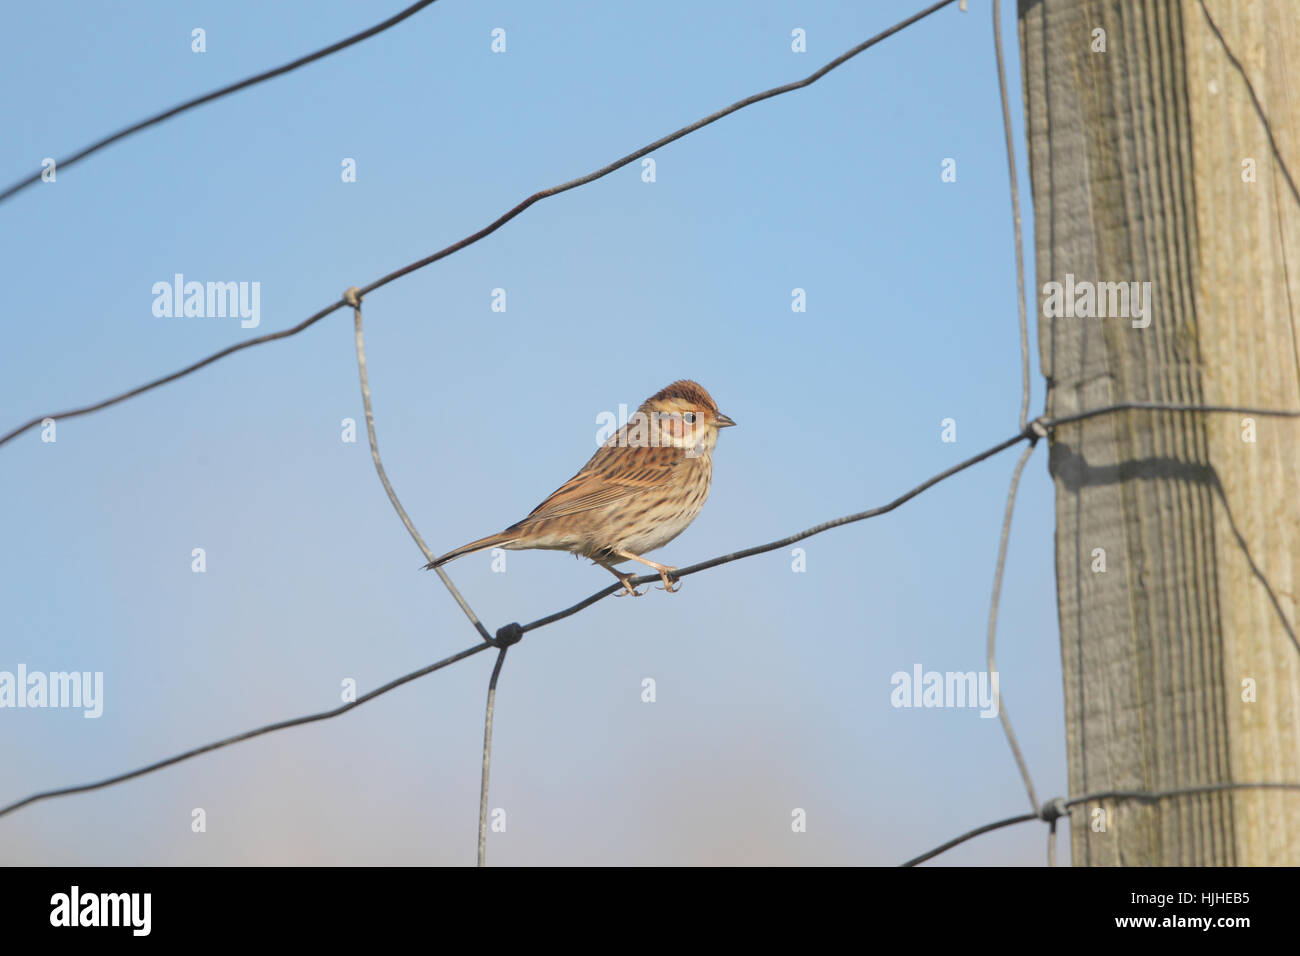 Little Bunting (Emberiza pusilla), a rare migrant to Britain, perched on a wire fence in Shetland, against a blue sky Stock Photo